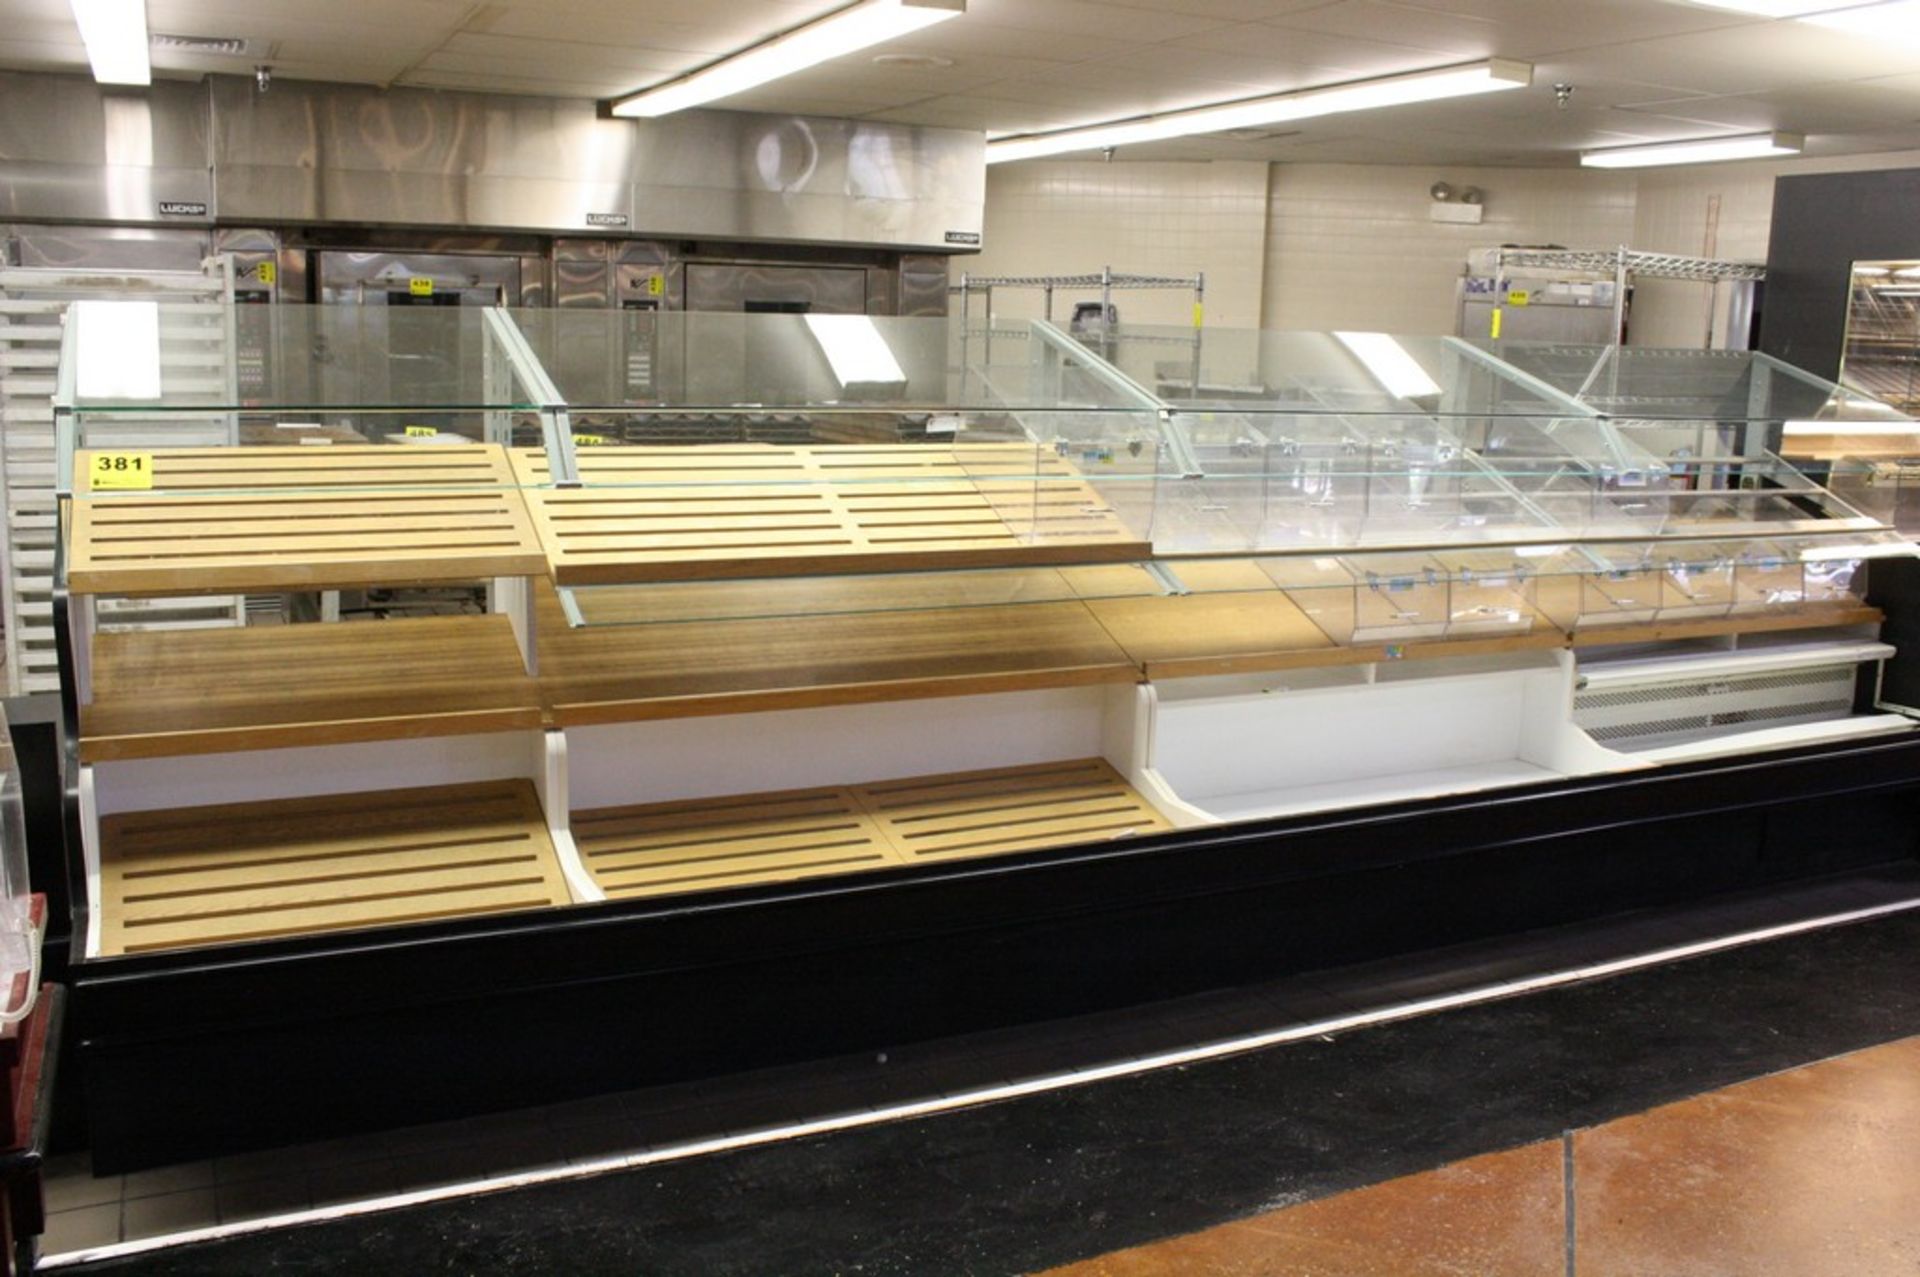 COLUMBUS SHOWCASE CO 17' BAKERY DISPLAY CASE W/MODEL 57297S2, 4' REFRIGERATED CASE